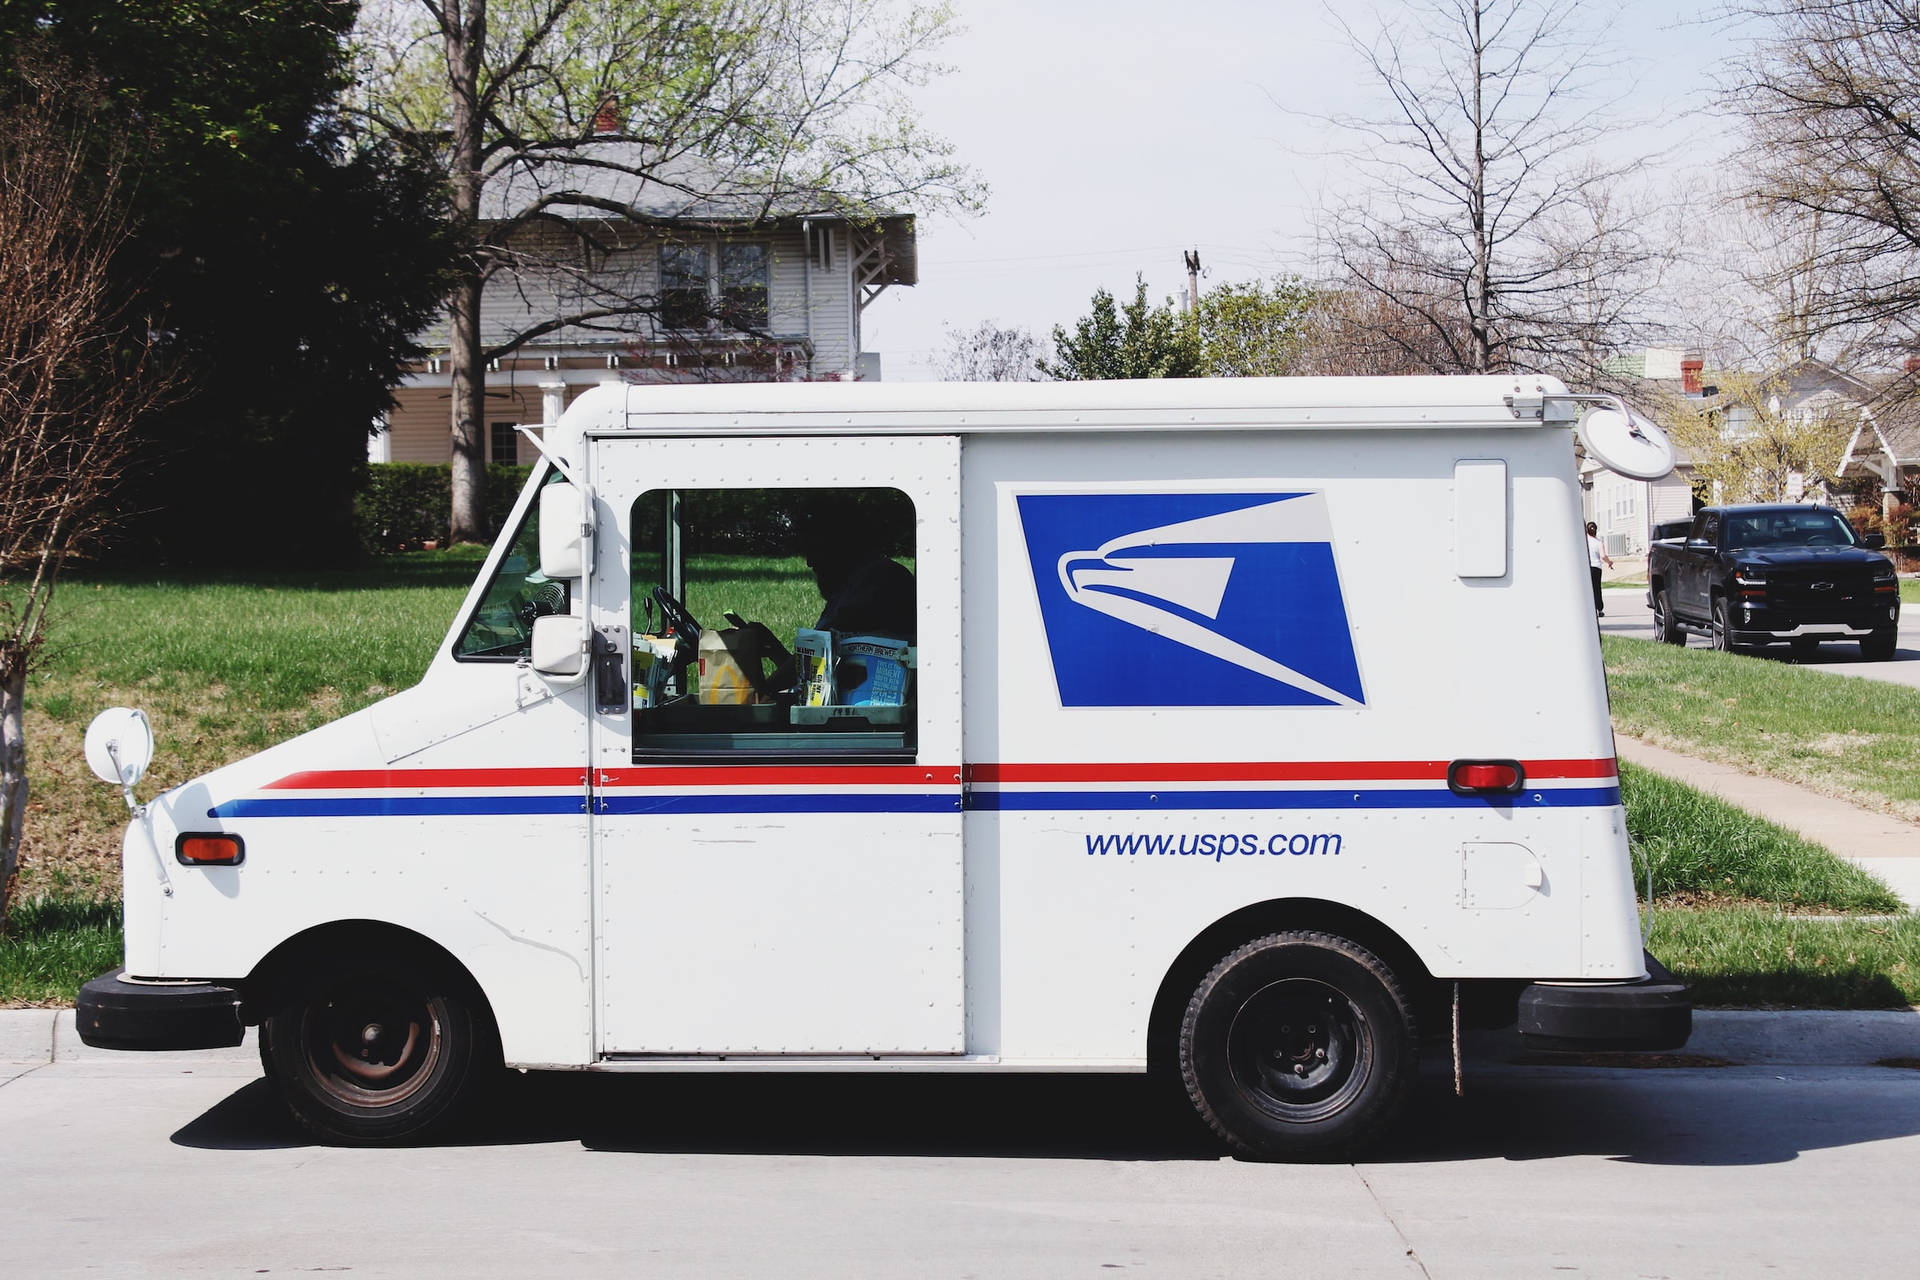 Usps Tracking Truck Parked Pavement Wallpaper